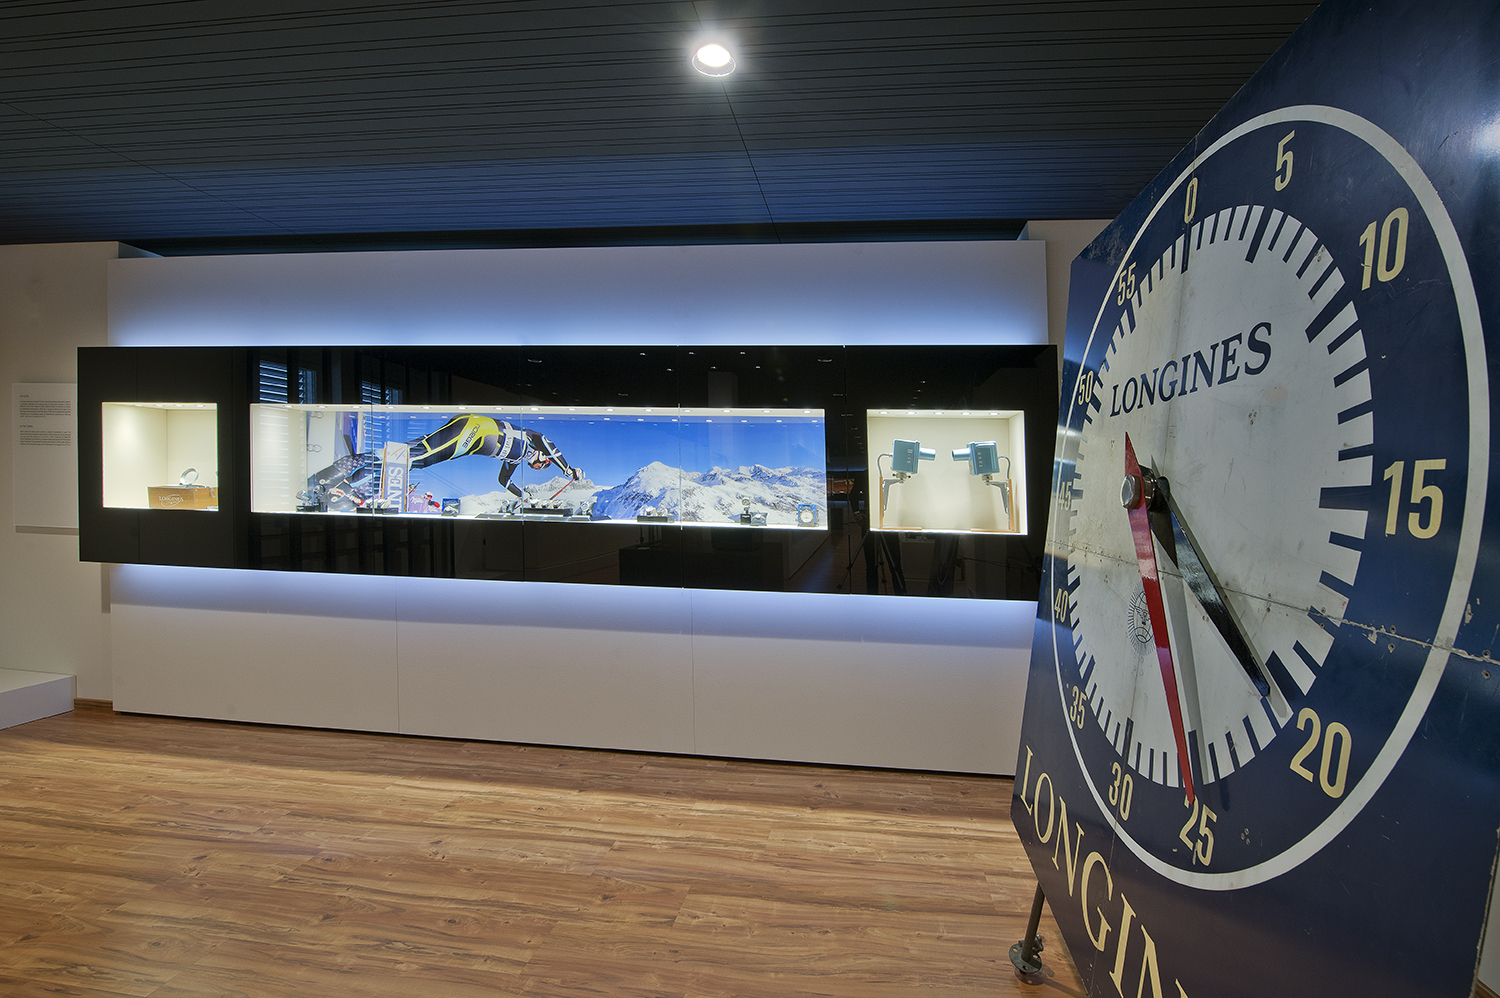 Showcasing Longines close association with equestrian sports, alpine skiing, tennis, gymnastics and archery – all disciplines that express in sporting terms, their core values of precision with elegance.